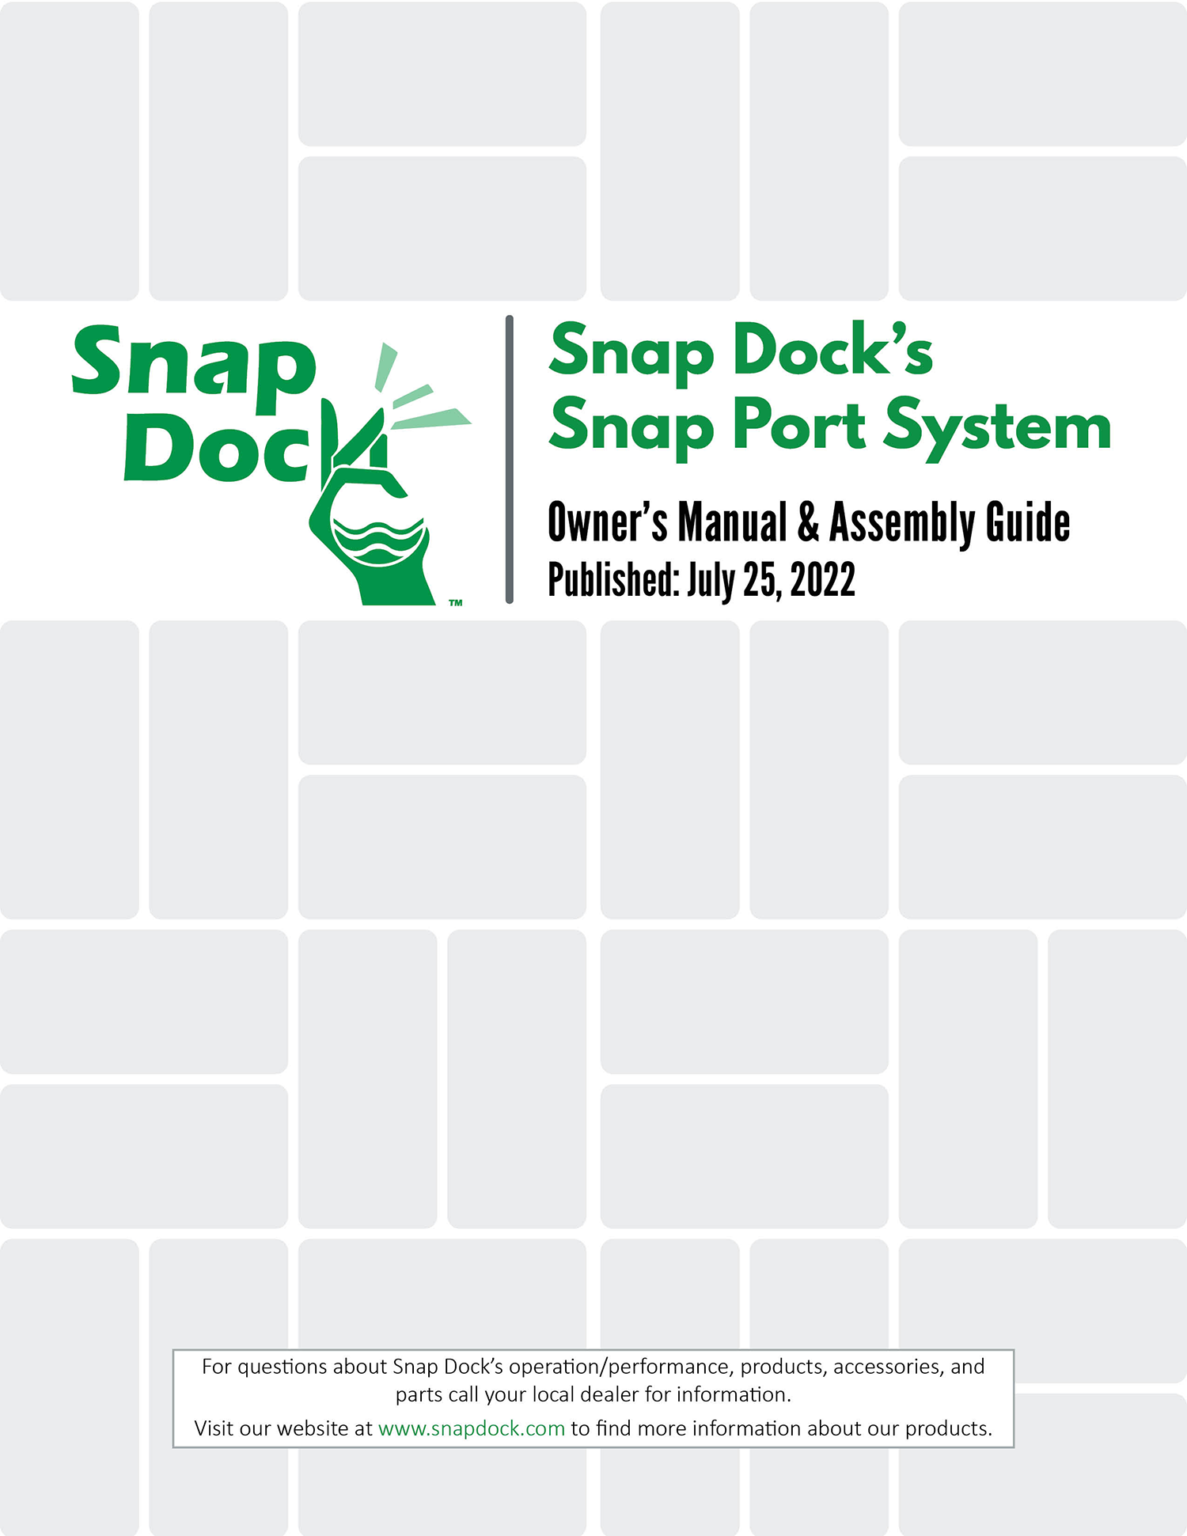 Snap-Dock-Snap-Port-Owners-Manual-Scaled-1187x1536